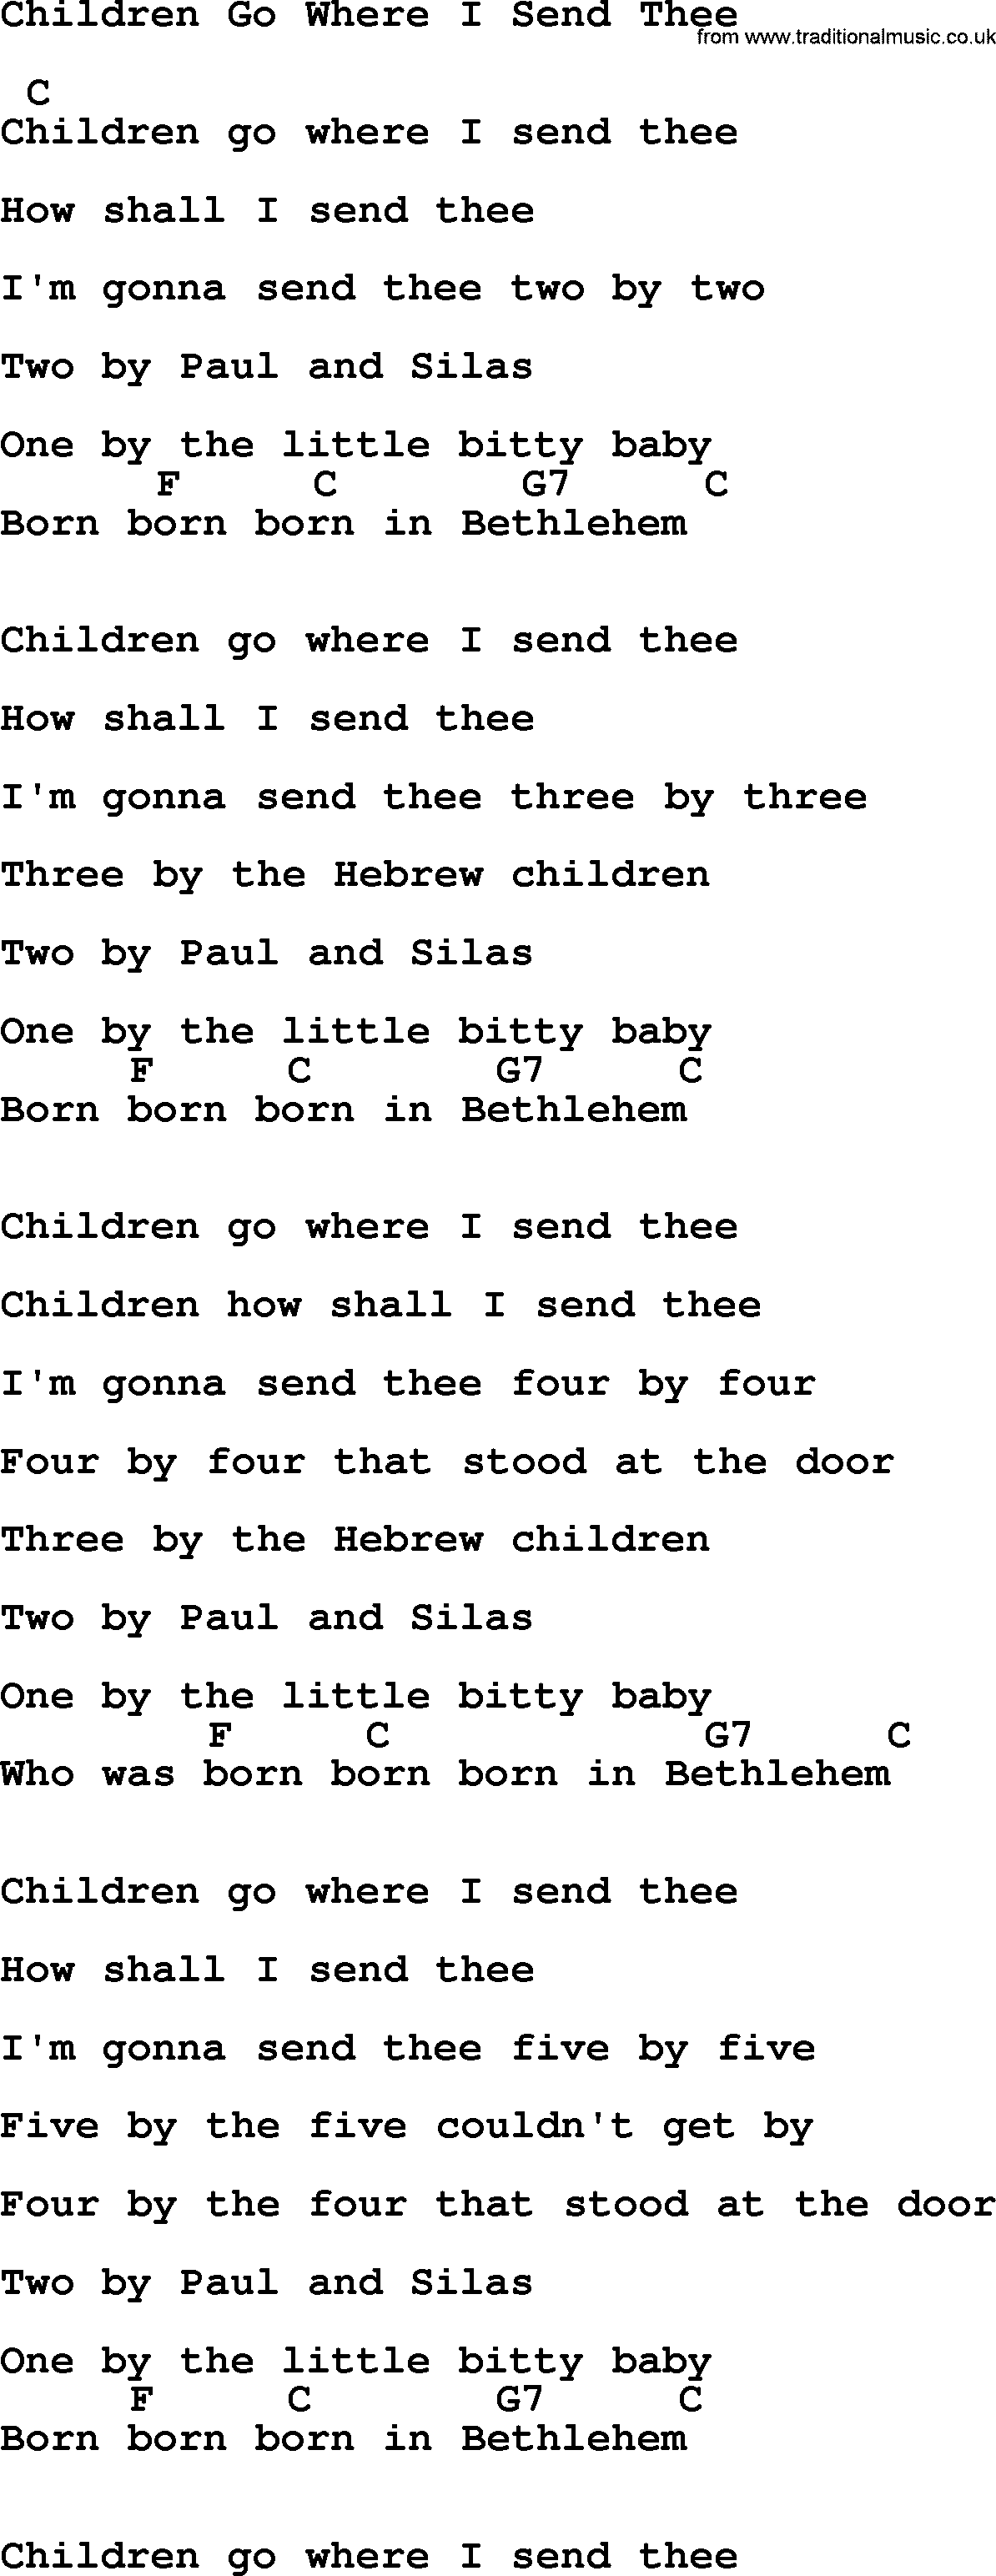 Johnny Cash song Children Go Where I Send Thee, lyrics and chords